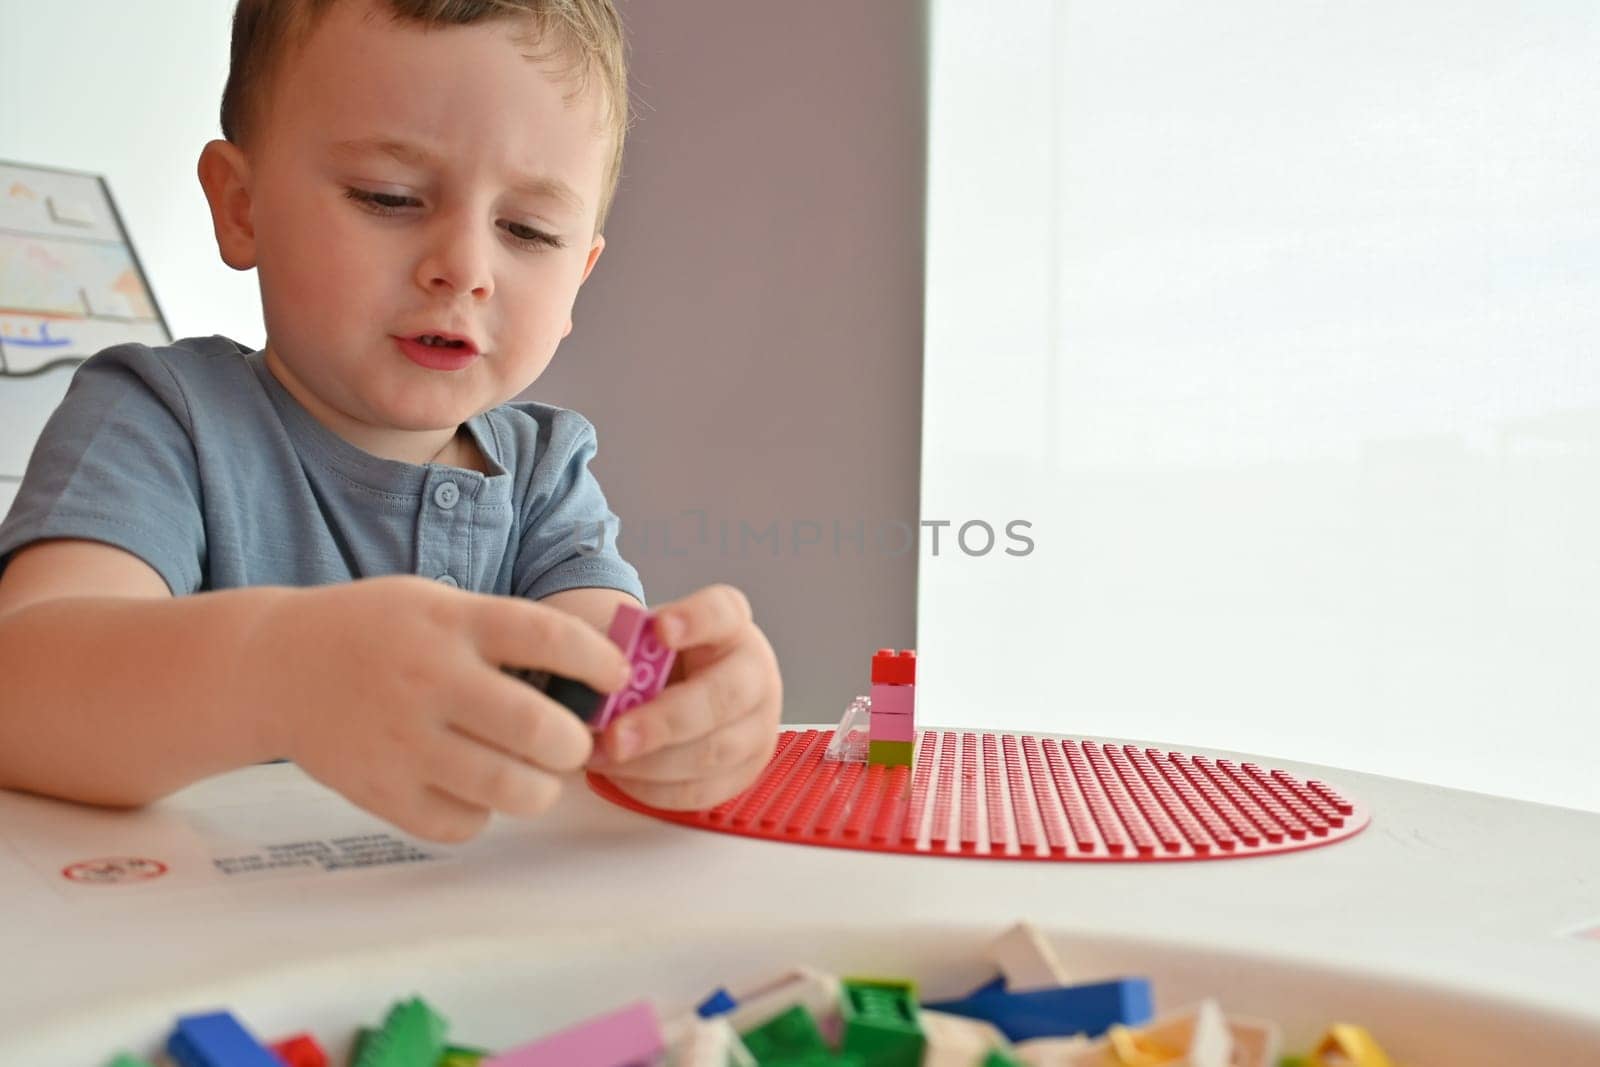 Little child playing with lots of colorful plastic toys indoor, building different cars and objects.